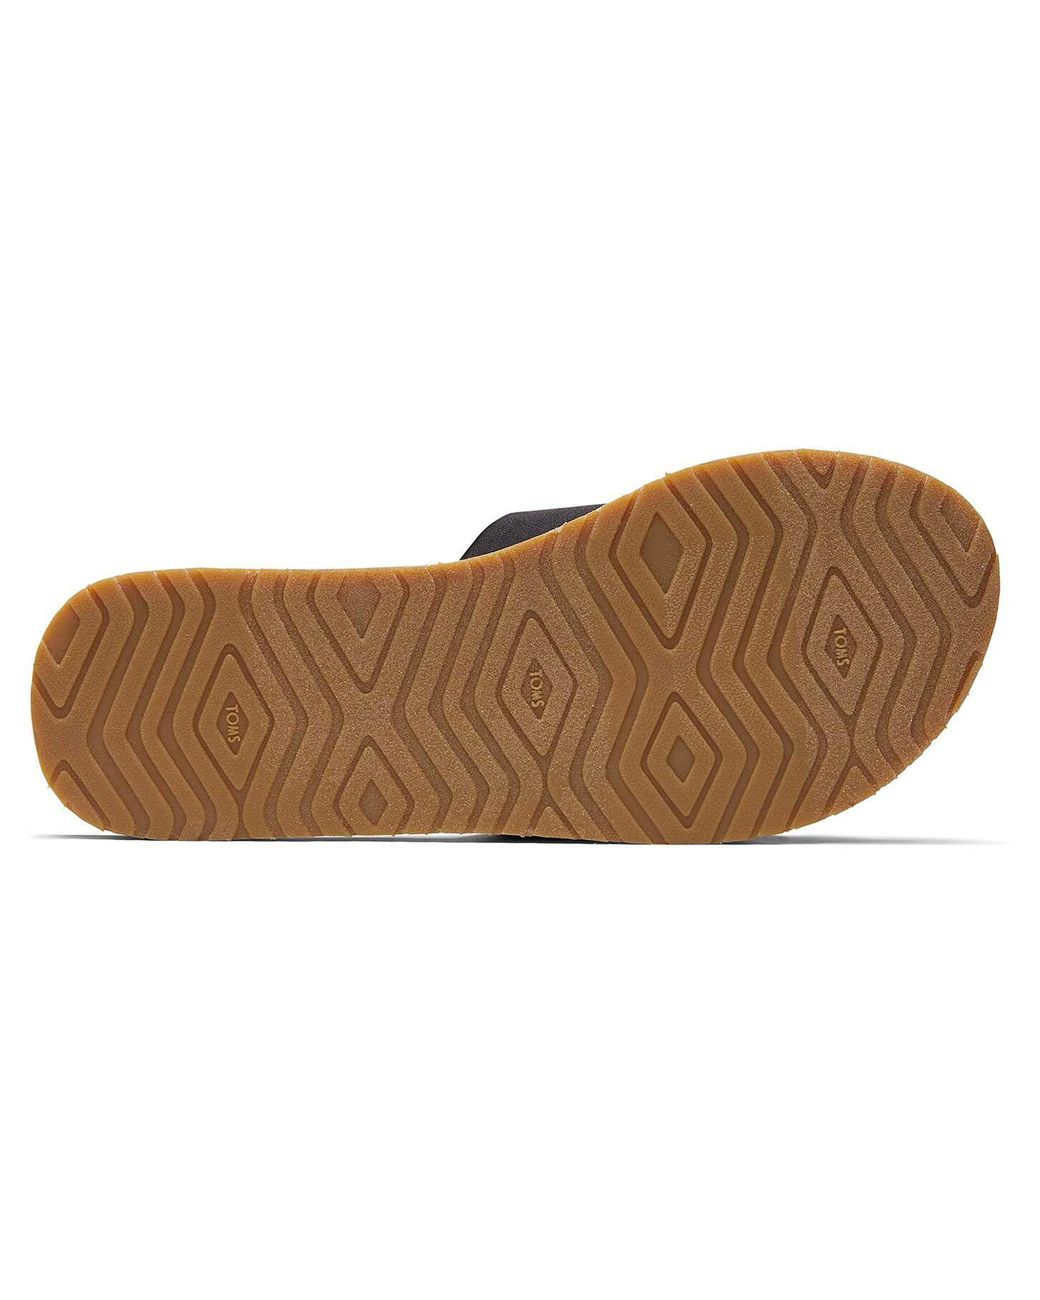 TOMS Synthetic Carly Sandal in Black | Lyst